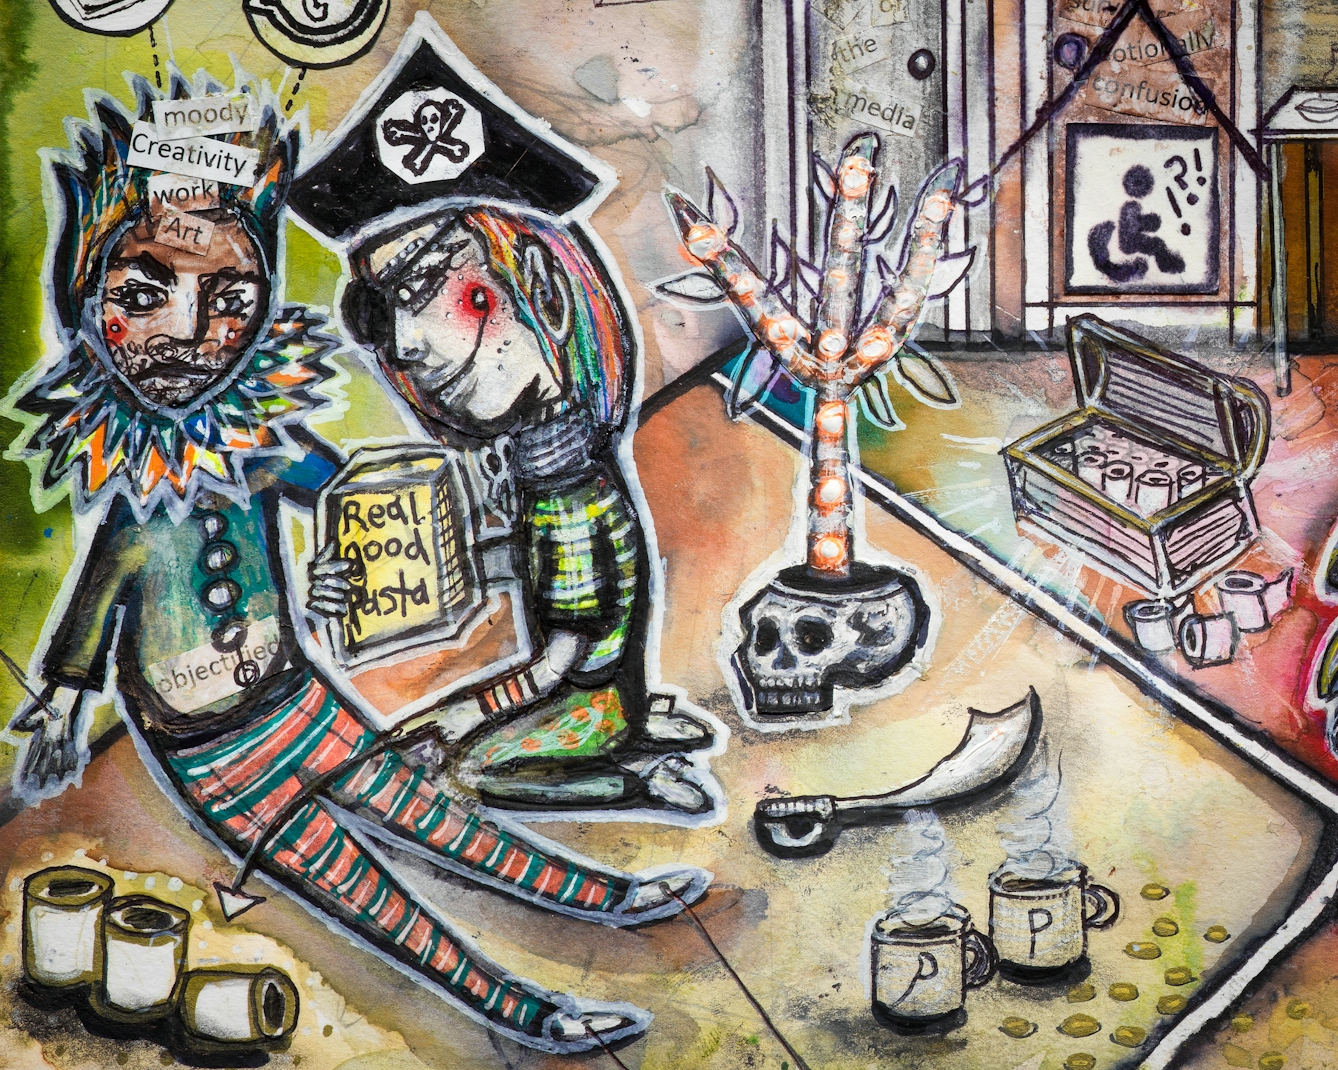 Artwork using watercolour and ink incorporating collaged words throughout the scene. The artwork shows a busy multi-coloured household room. A man dressed in a ruff and a crown sits against a wall looking tired with various icons including a disabled symbol with a wheelchair, as well as those belonging to social media joined by dotted lines above his head. On his crown are the words ‘moody’, ‘creativity’, ‘work’ and ‘art’, while on his chest is the word ‘objectified’. Kneeling beside him, another person dressed as a pirate, holds a box of pasta.